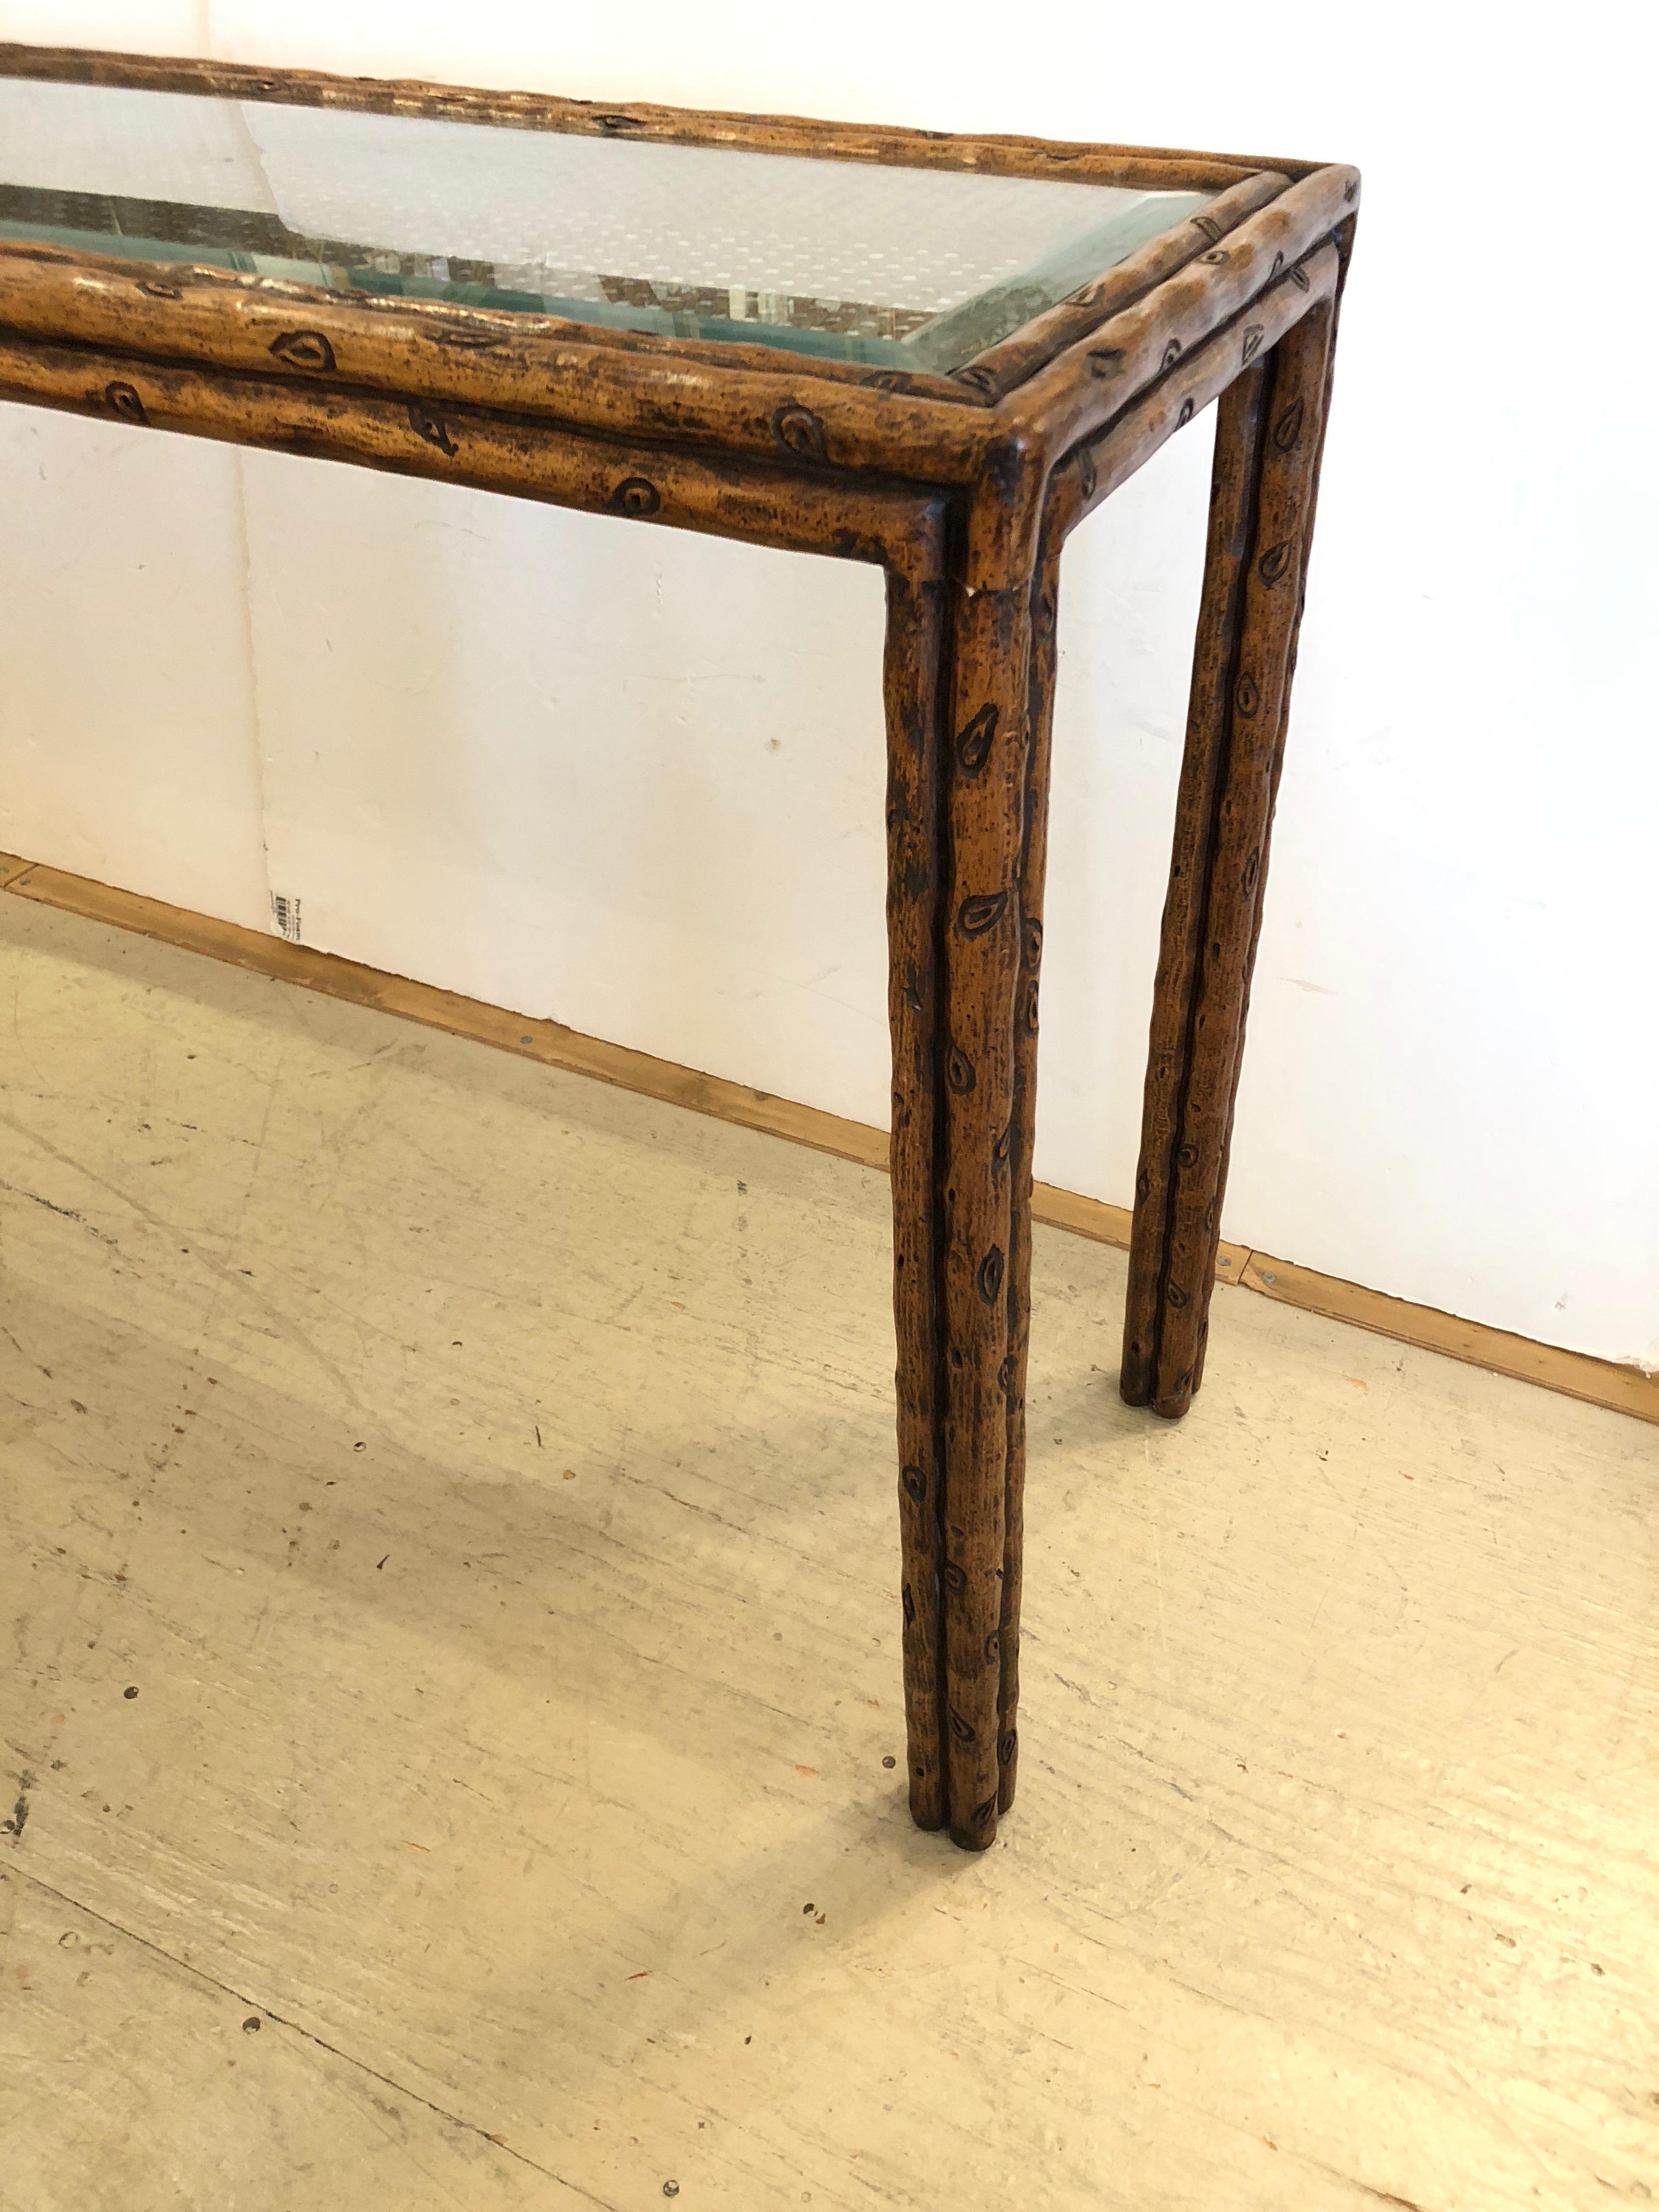 Very stylish console table having an earthy faux bois frame and handsome brown caned top covered with glass.